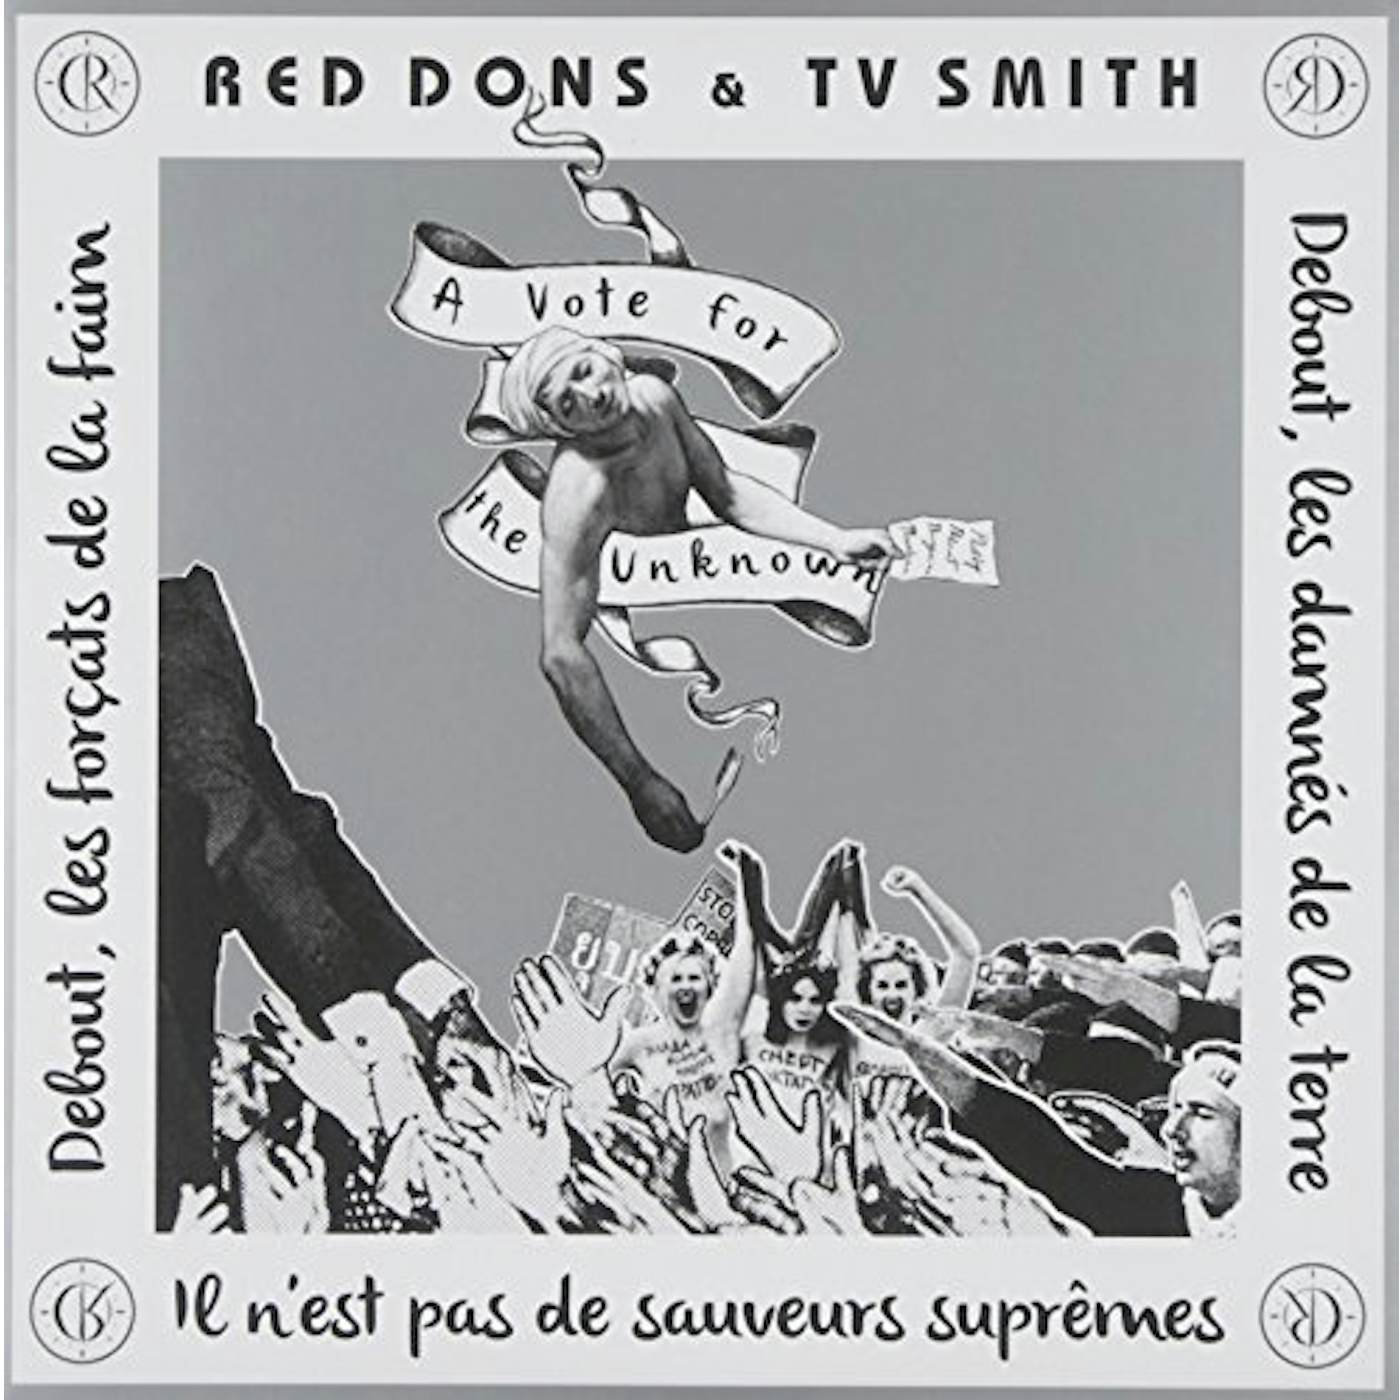 Red Dons VOTE FOR THE UNKNOWN Vinyl Record